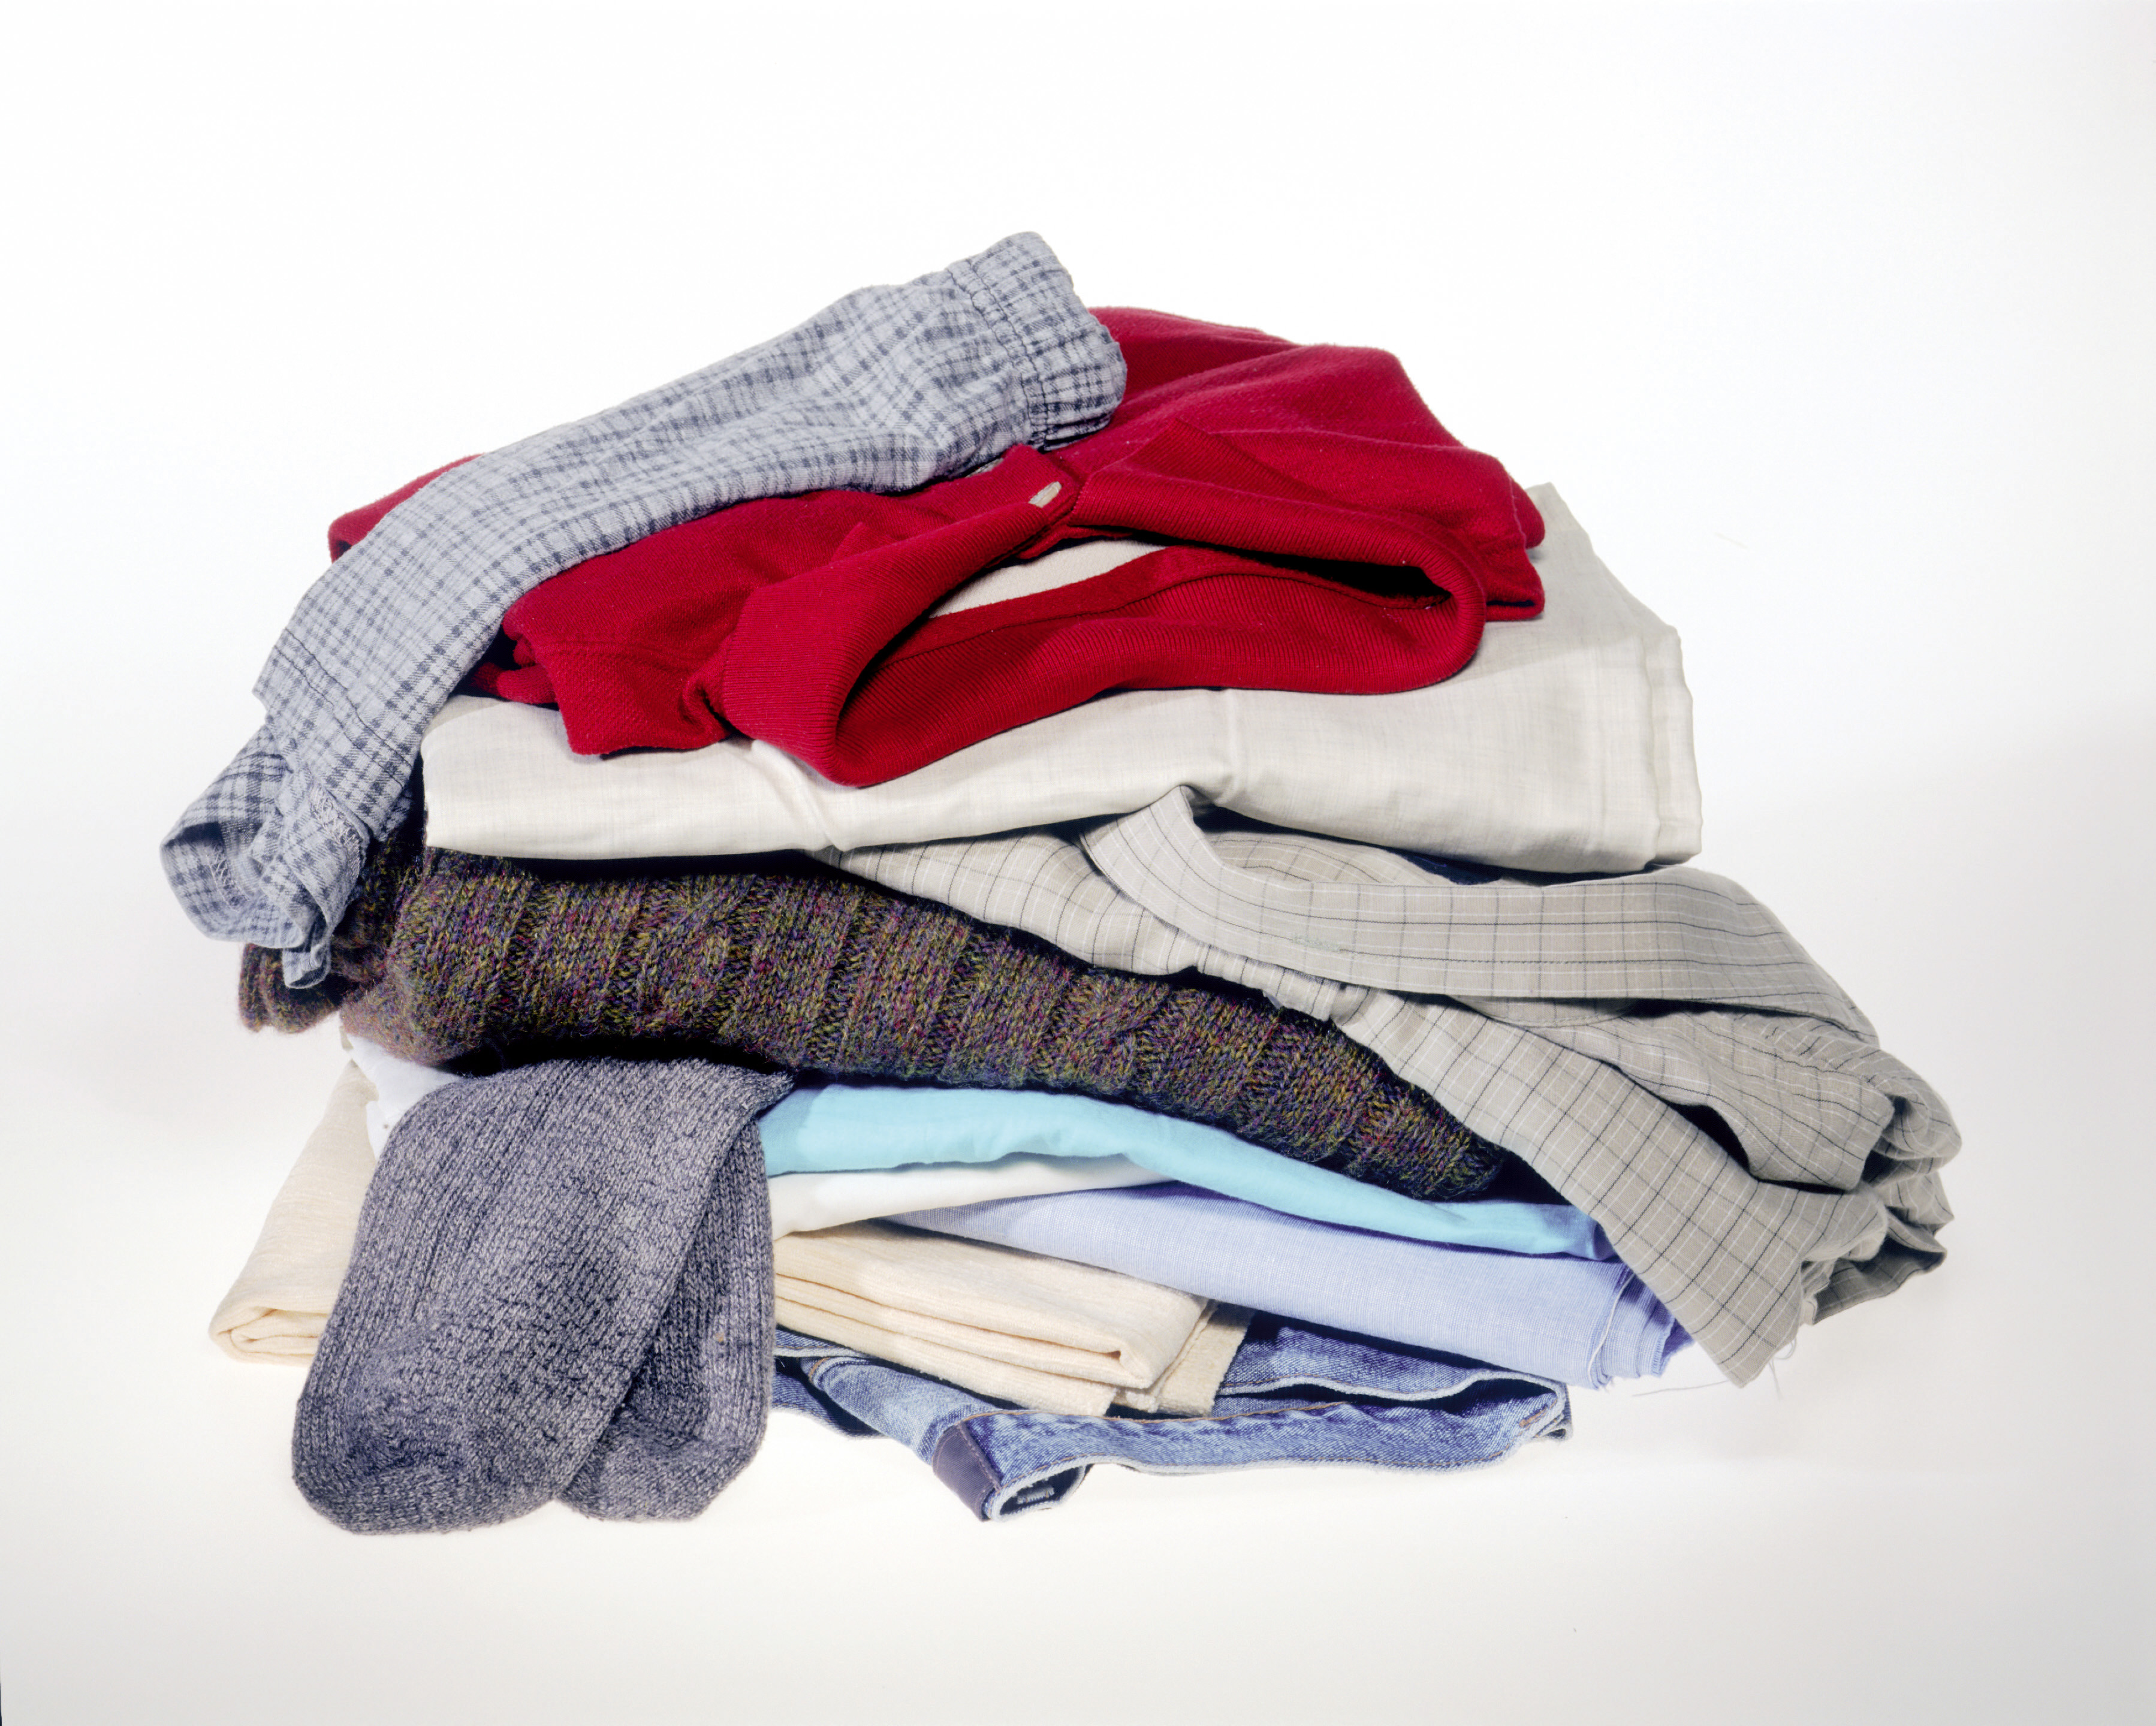 8 different things to do with your old clothes